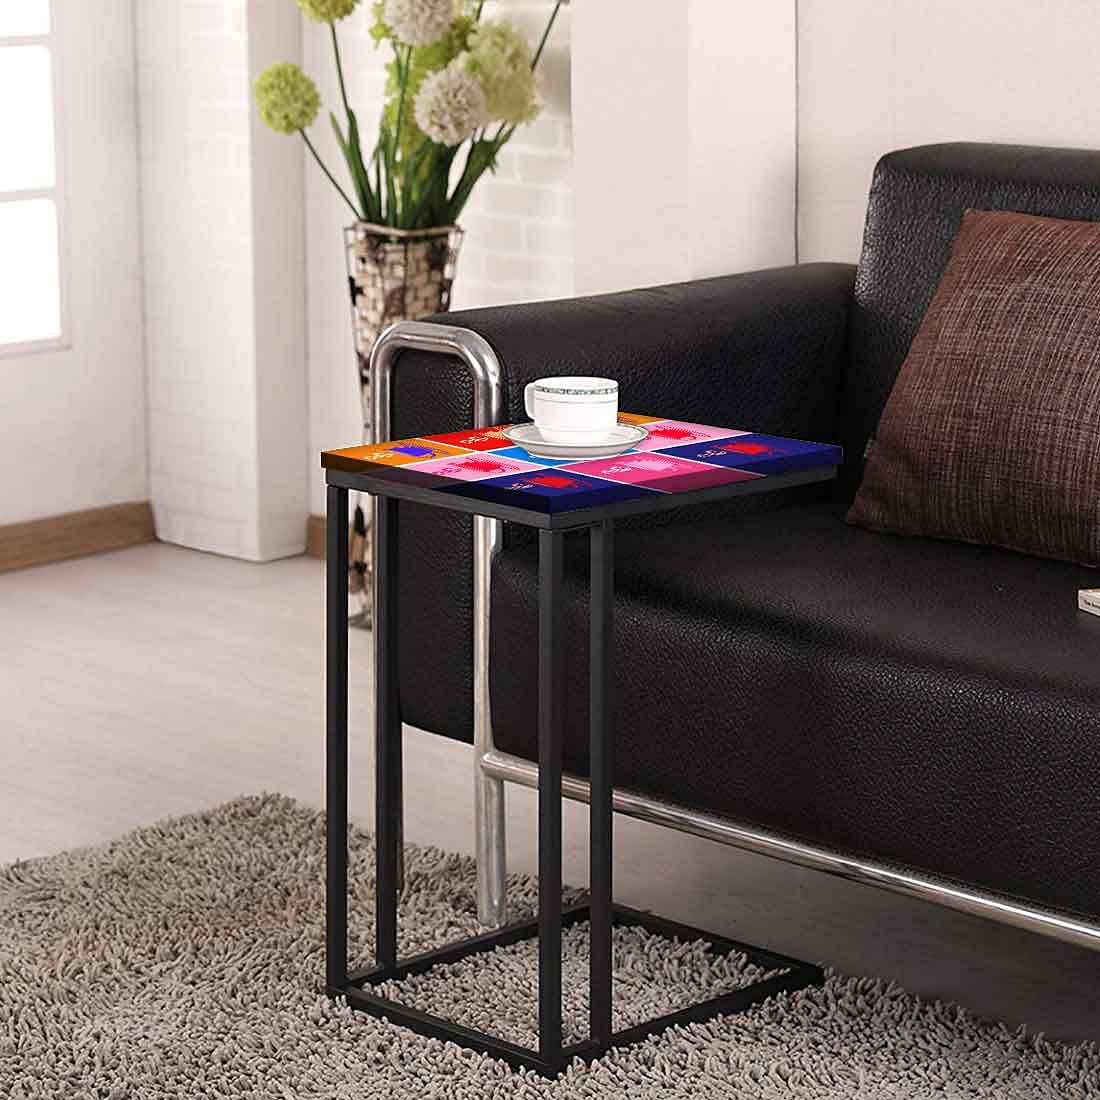 C Shaped End Table For Sofa - Cup of Tea Nutcase